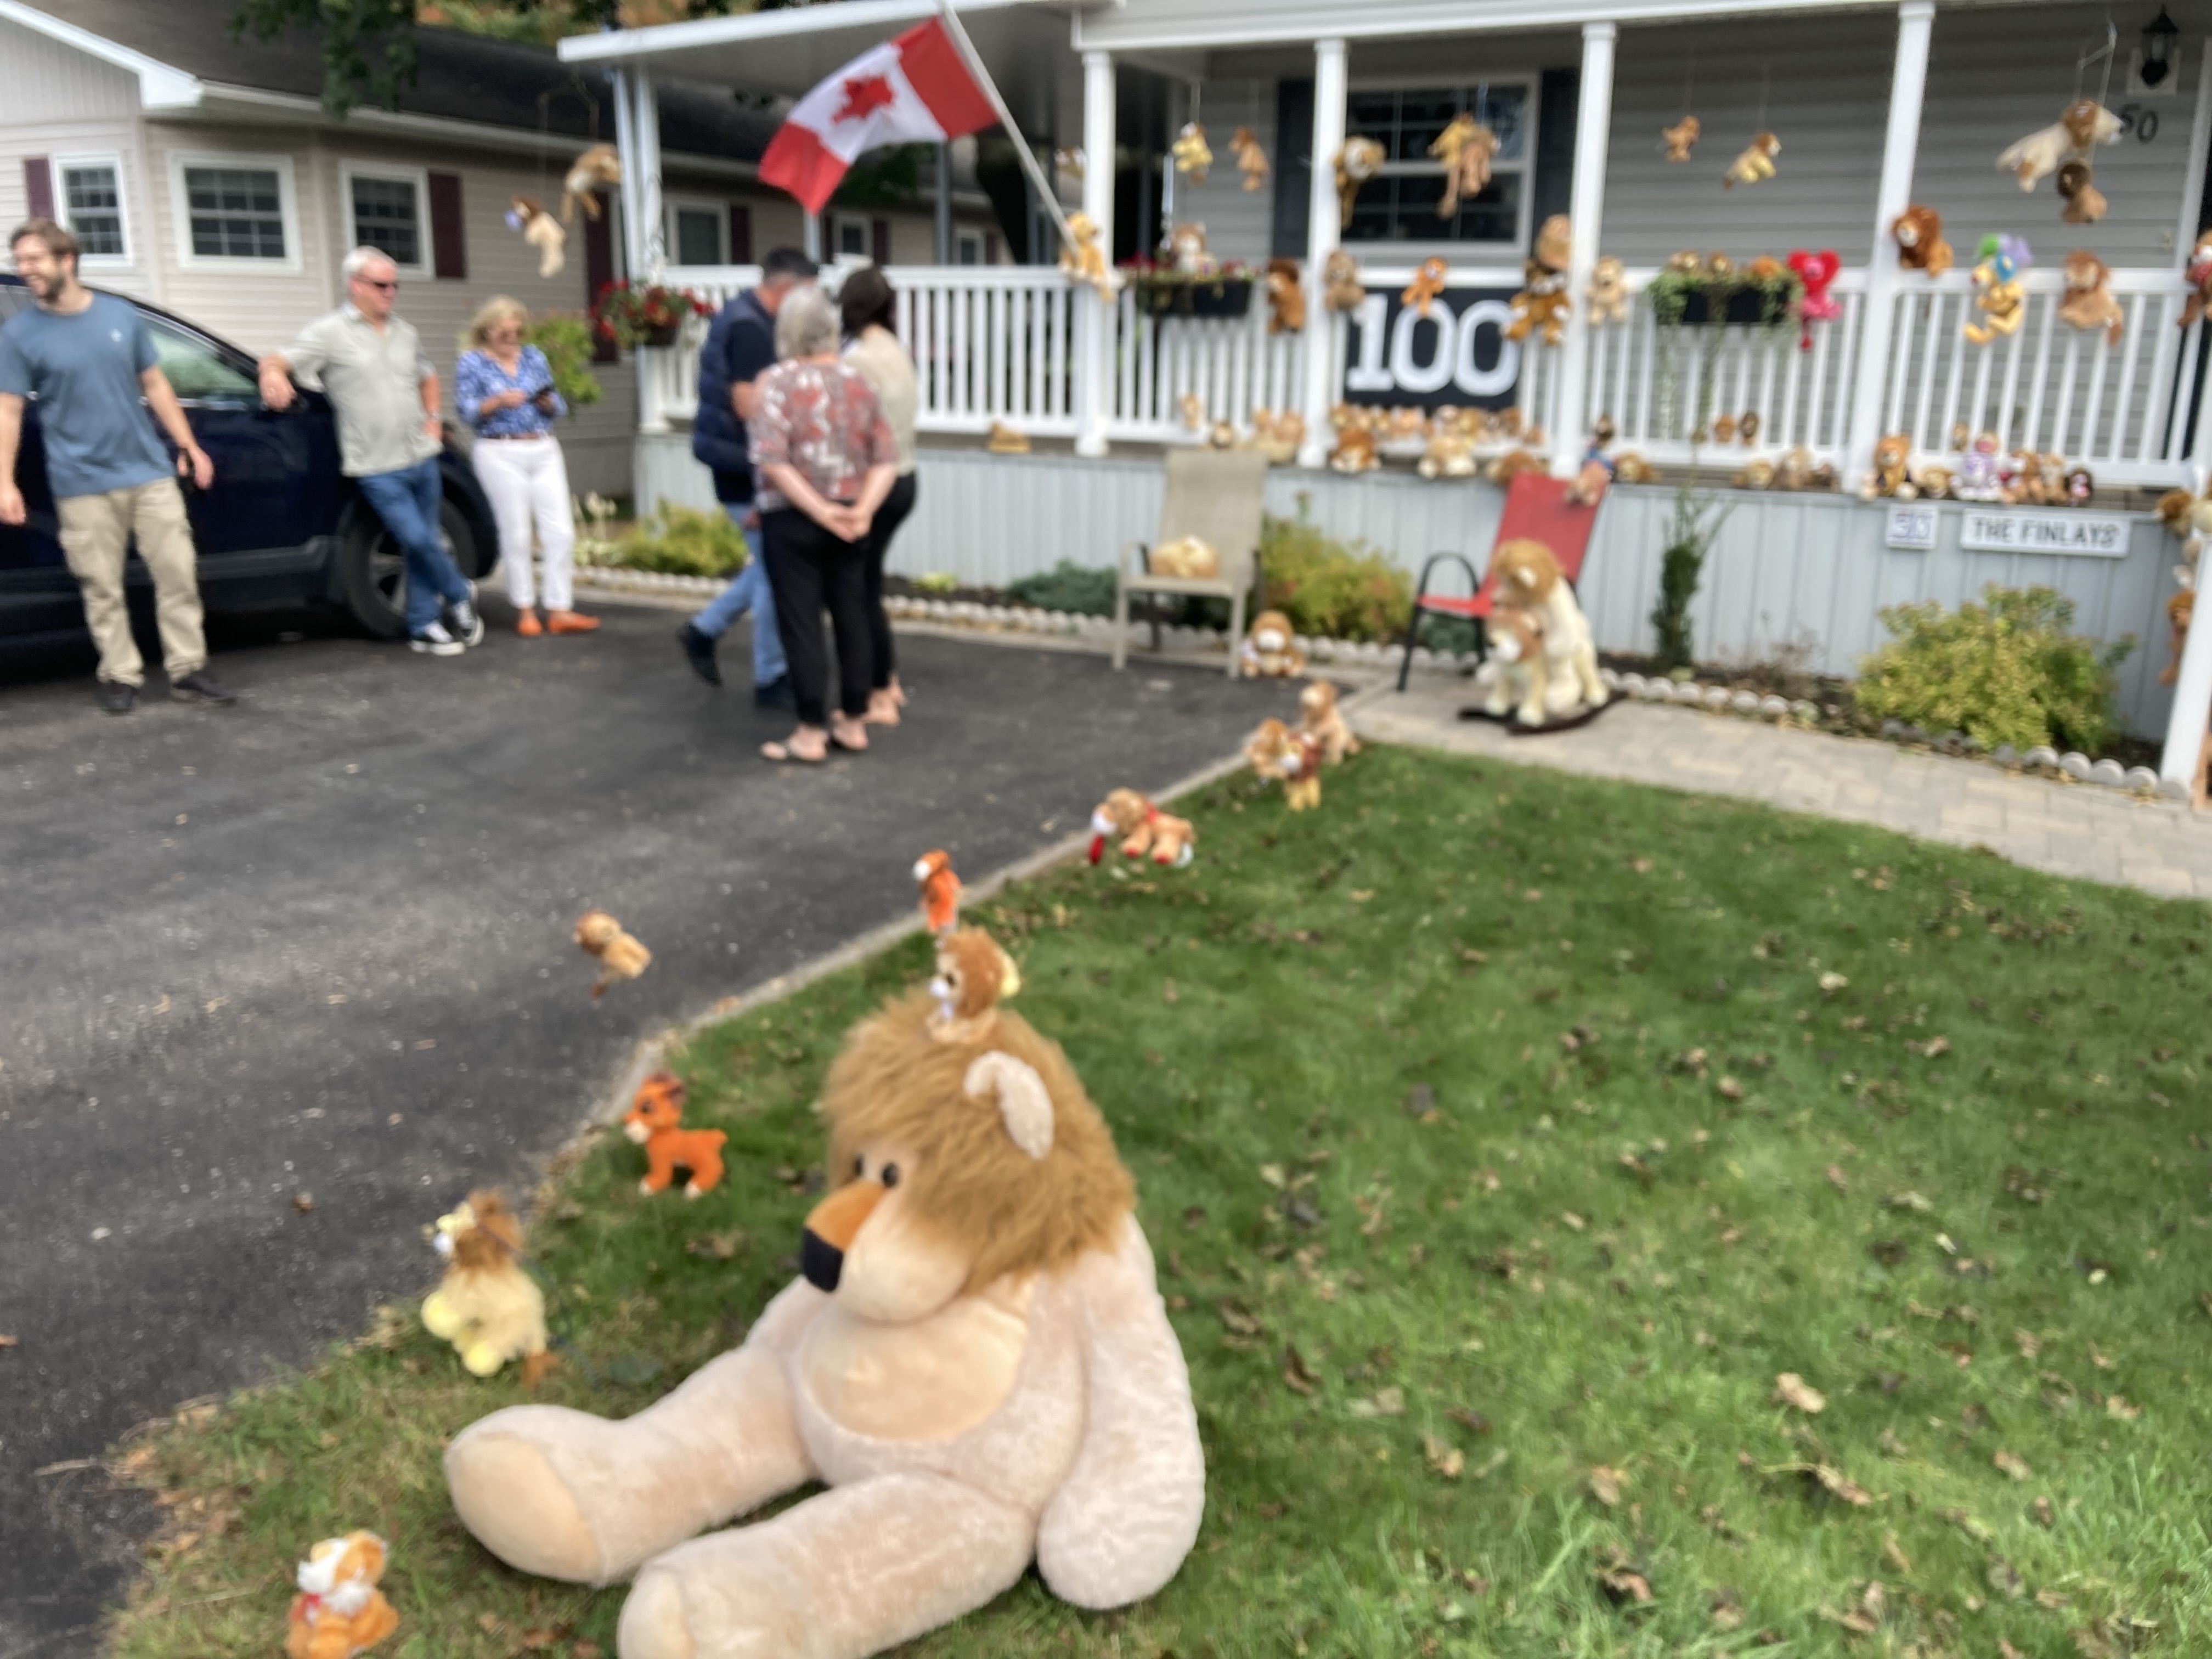 100 stuffed lions mark a special anniversary in Goderich